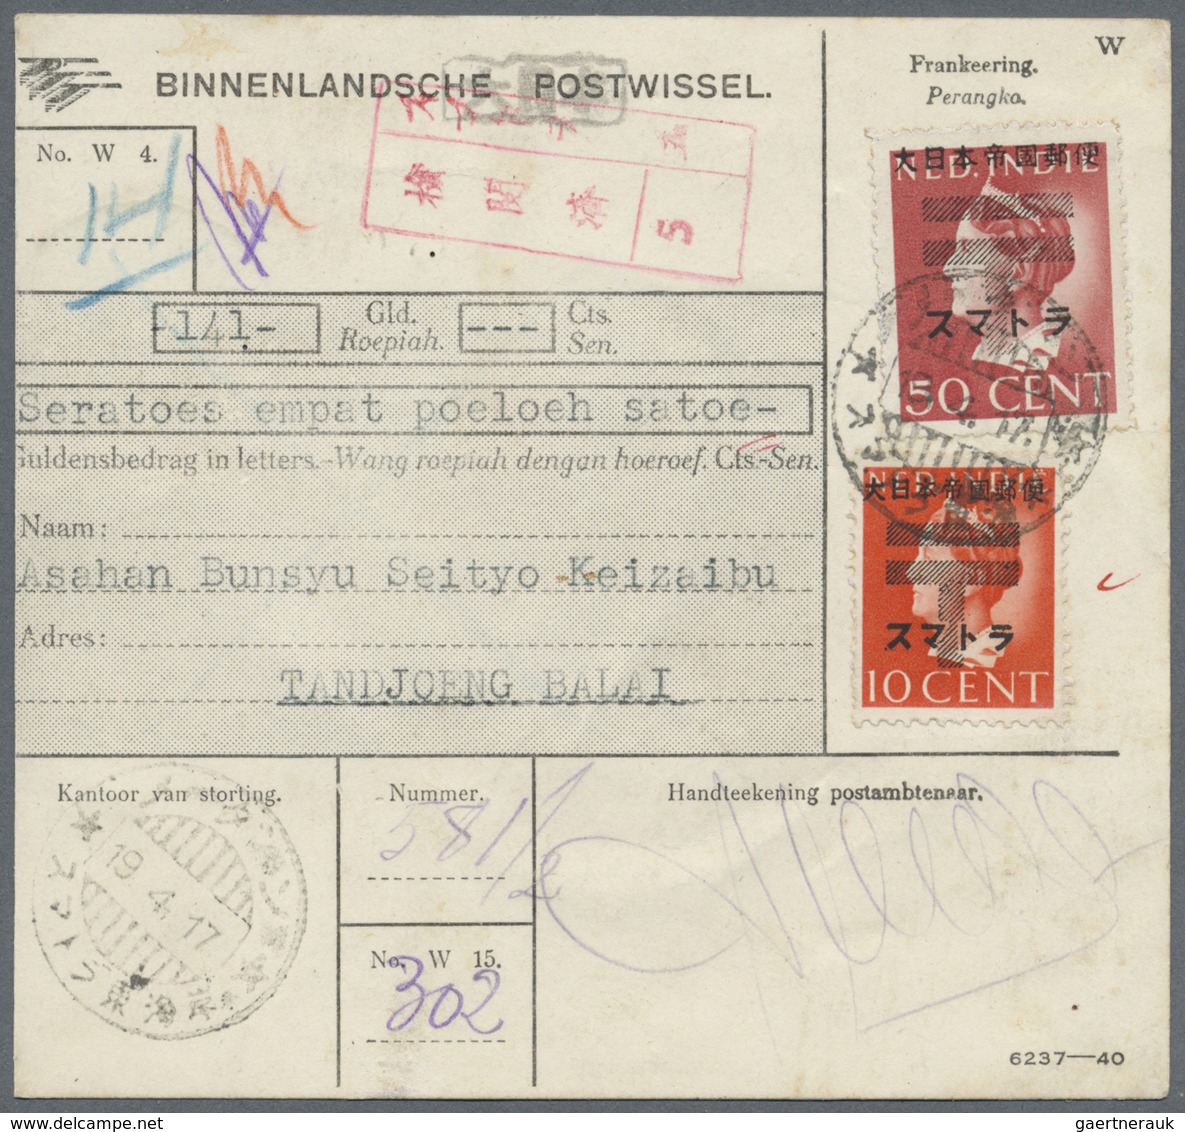 Br/GA Japanische Besetzung WK II: 1942/45, covers/stationery (70+) plus some MNH units of due stamps Navy